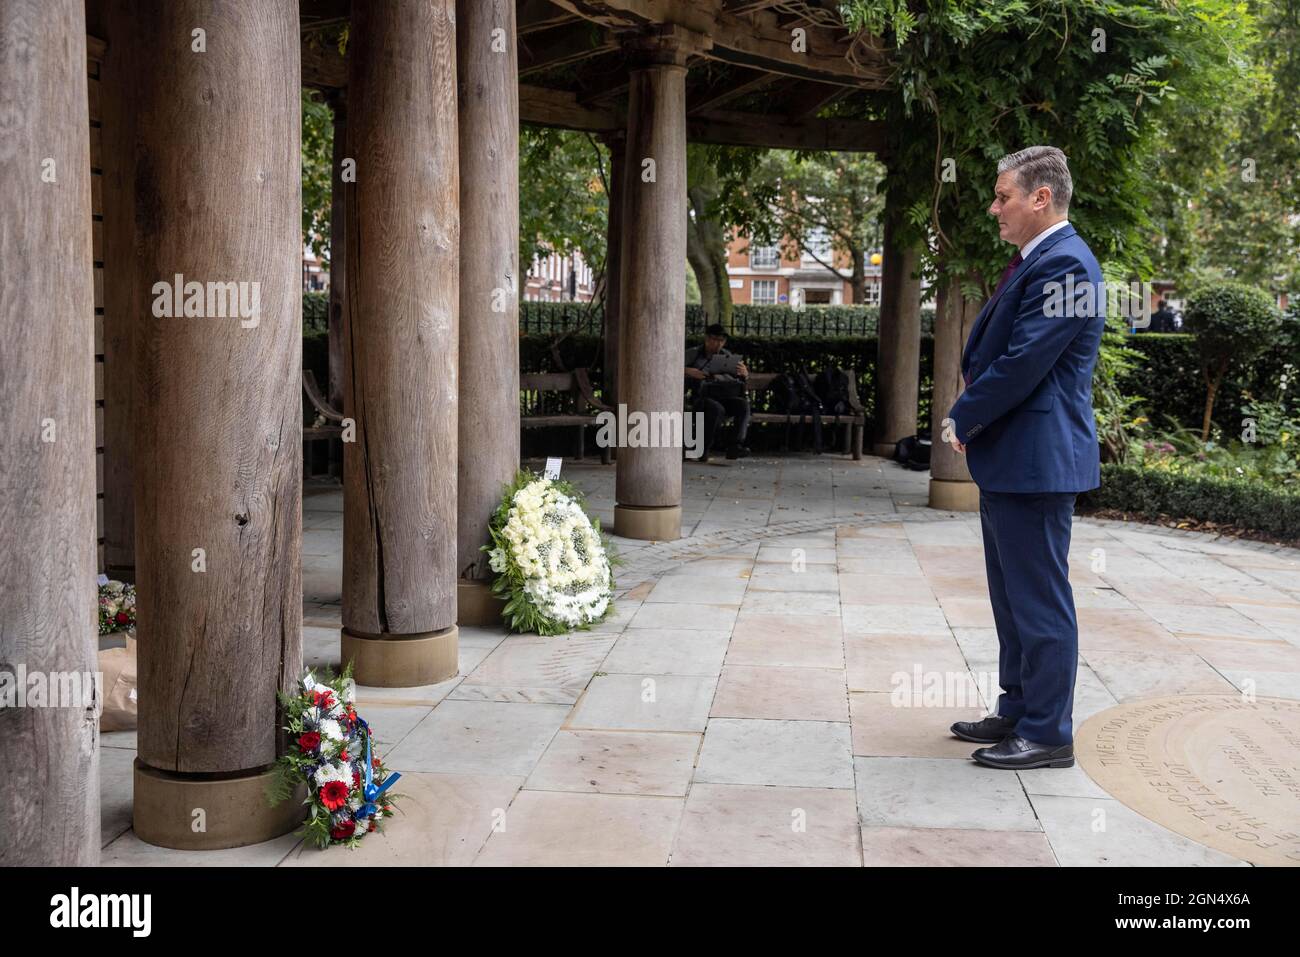 Sir Keir Starmer, Leader of the Labour Party at the September 11 Memorial Garden in London's Grosvenor Square on the 20th Anniversary of 9/11. Stock Photo